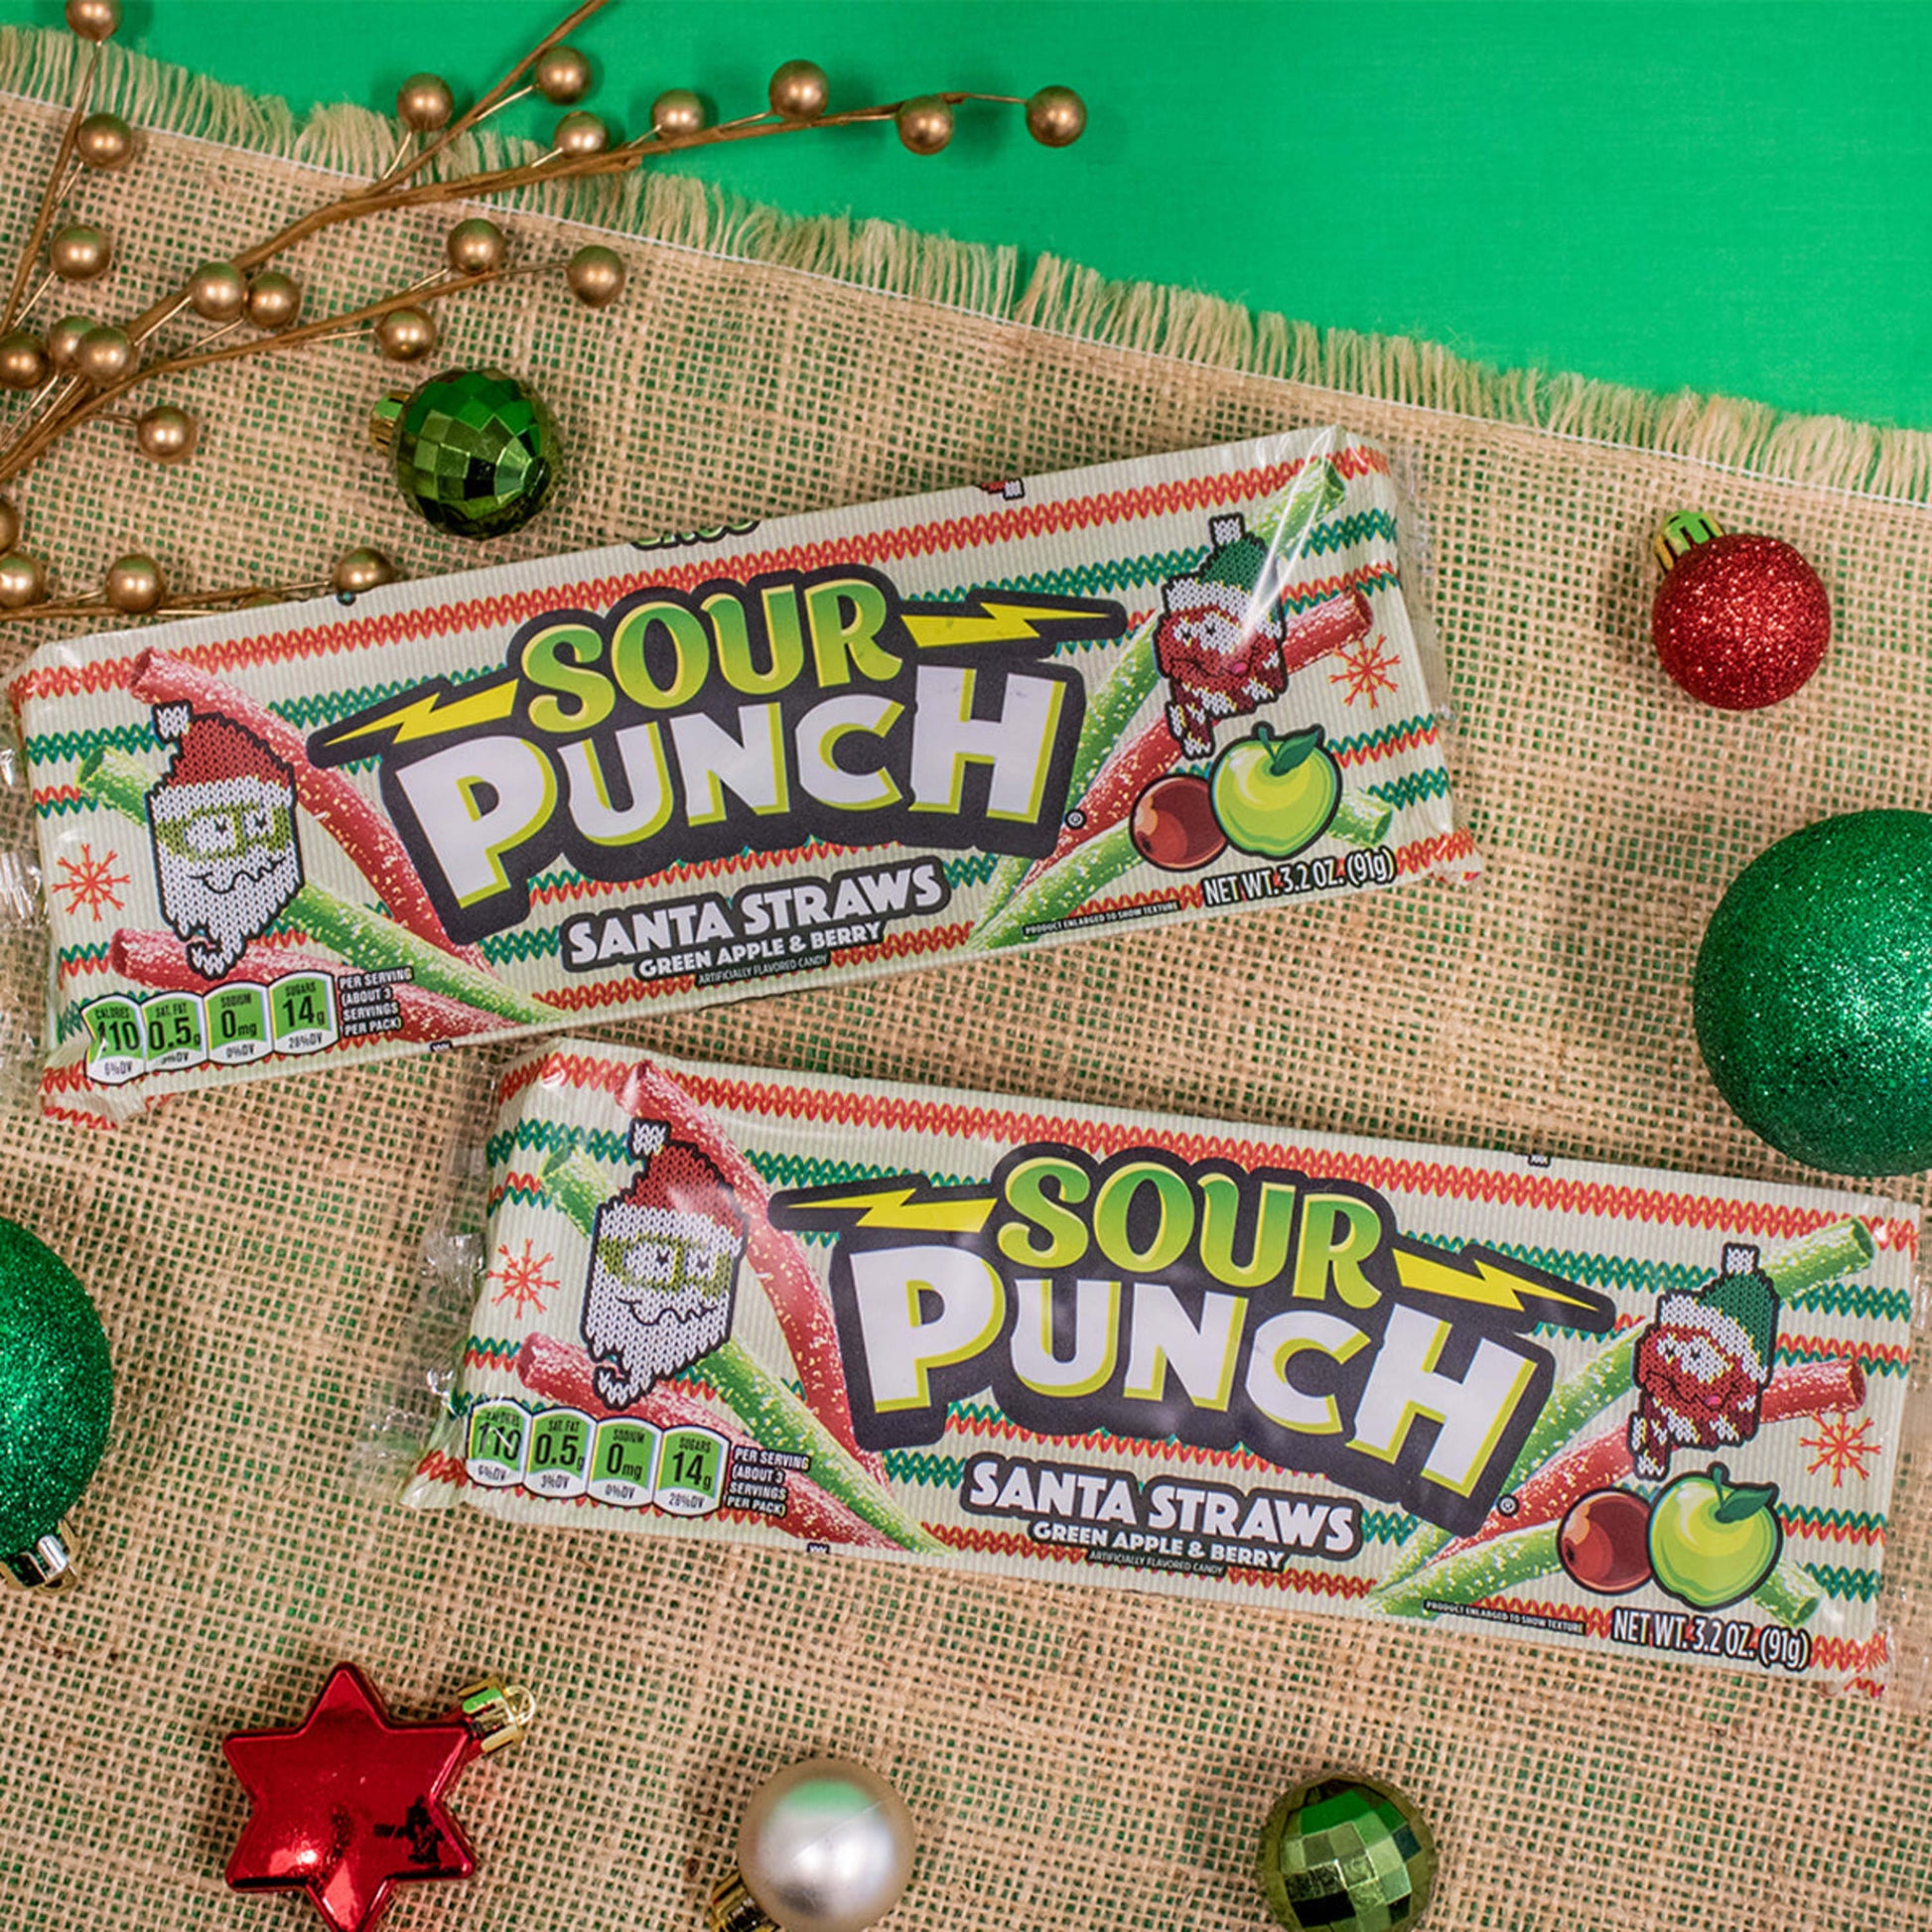 Sour Punch Santa Straws Candy Trays with holiday ornaments